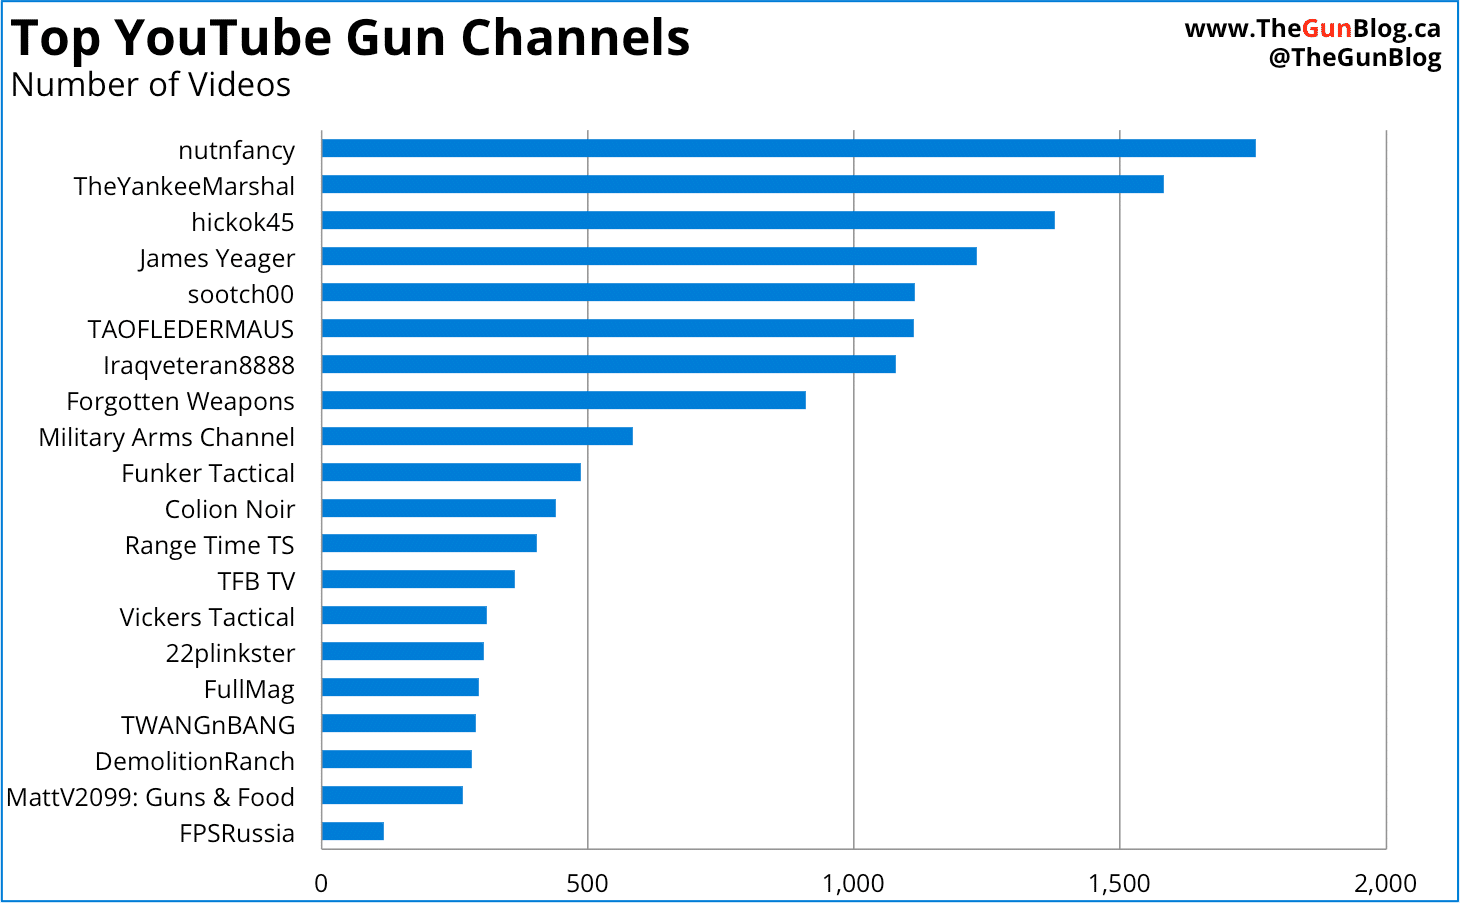 Top YouTube Gun Channels by Total Number of Videos